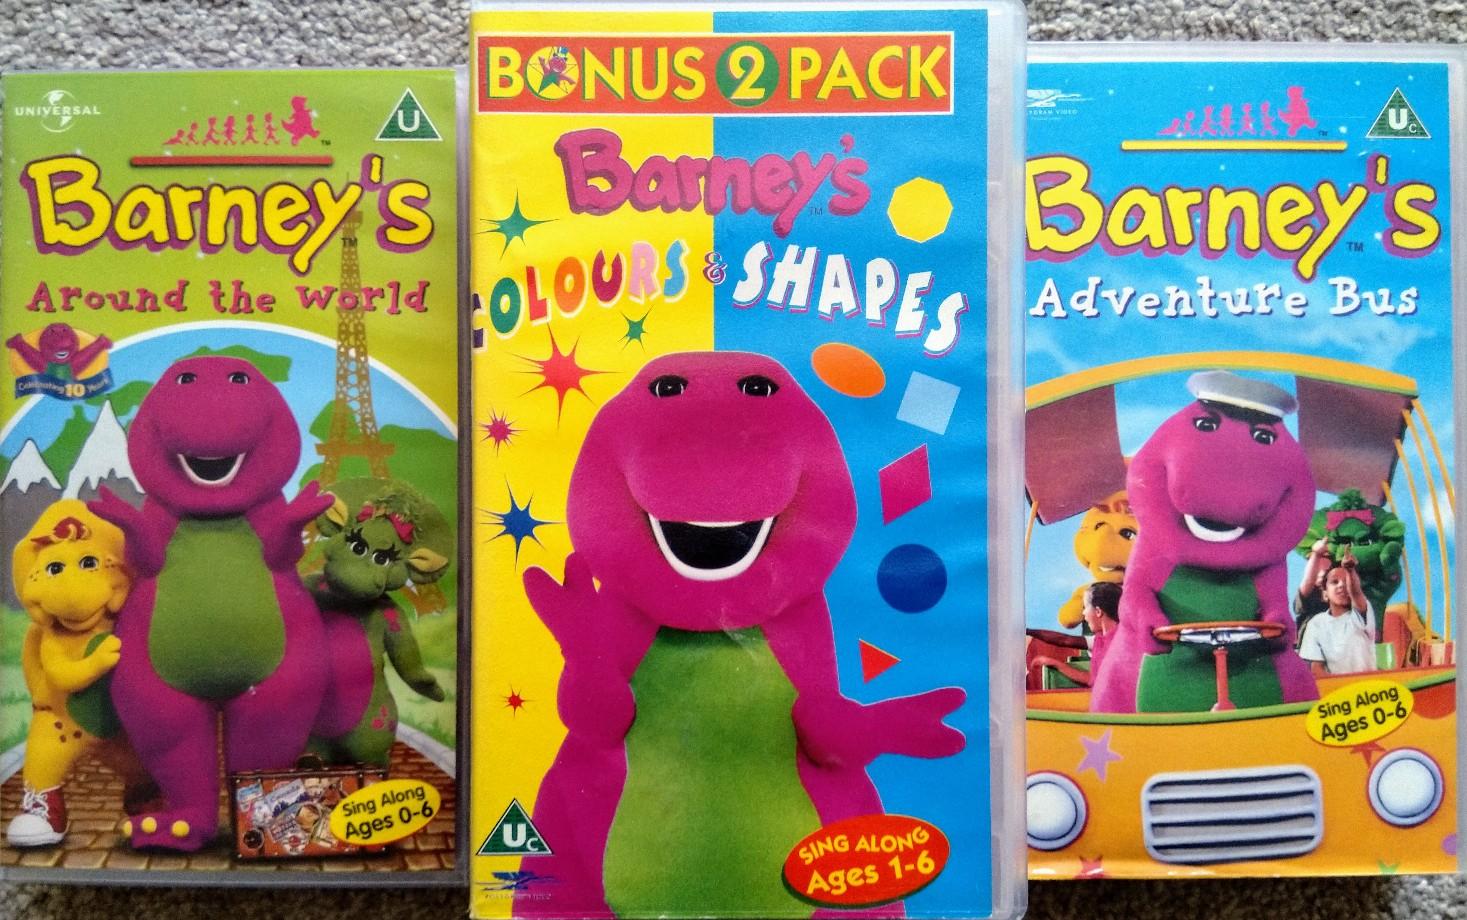 Vhs Rock With Barney Front Barney Rock Dvd Covers | The Best Porn Website